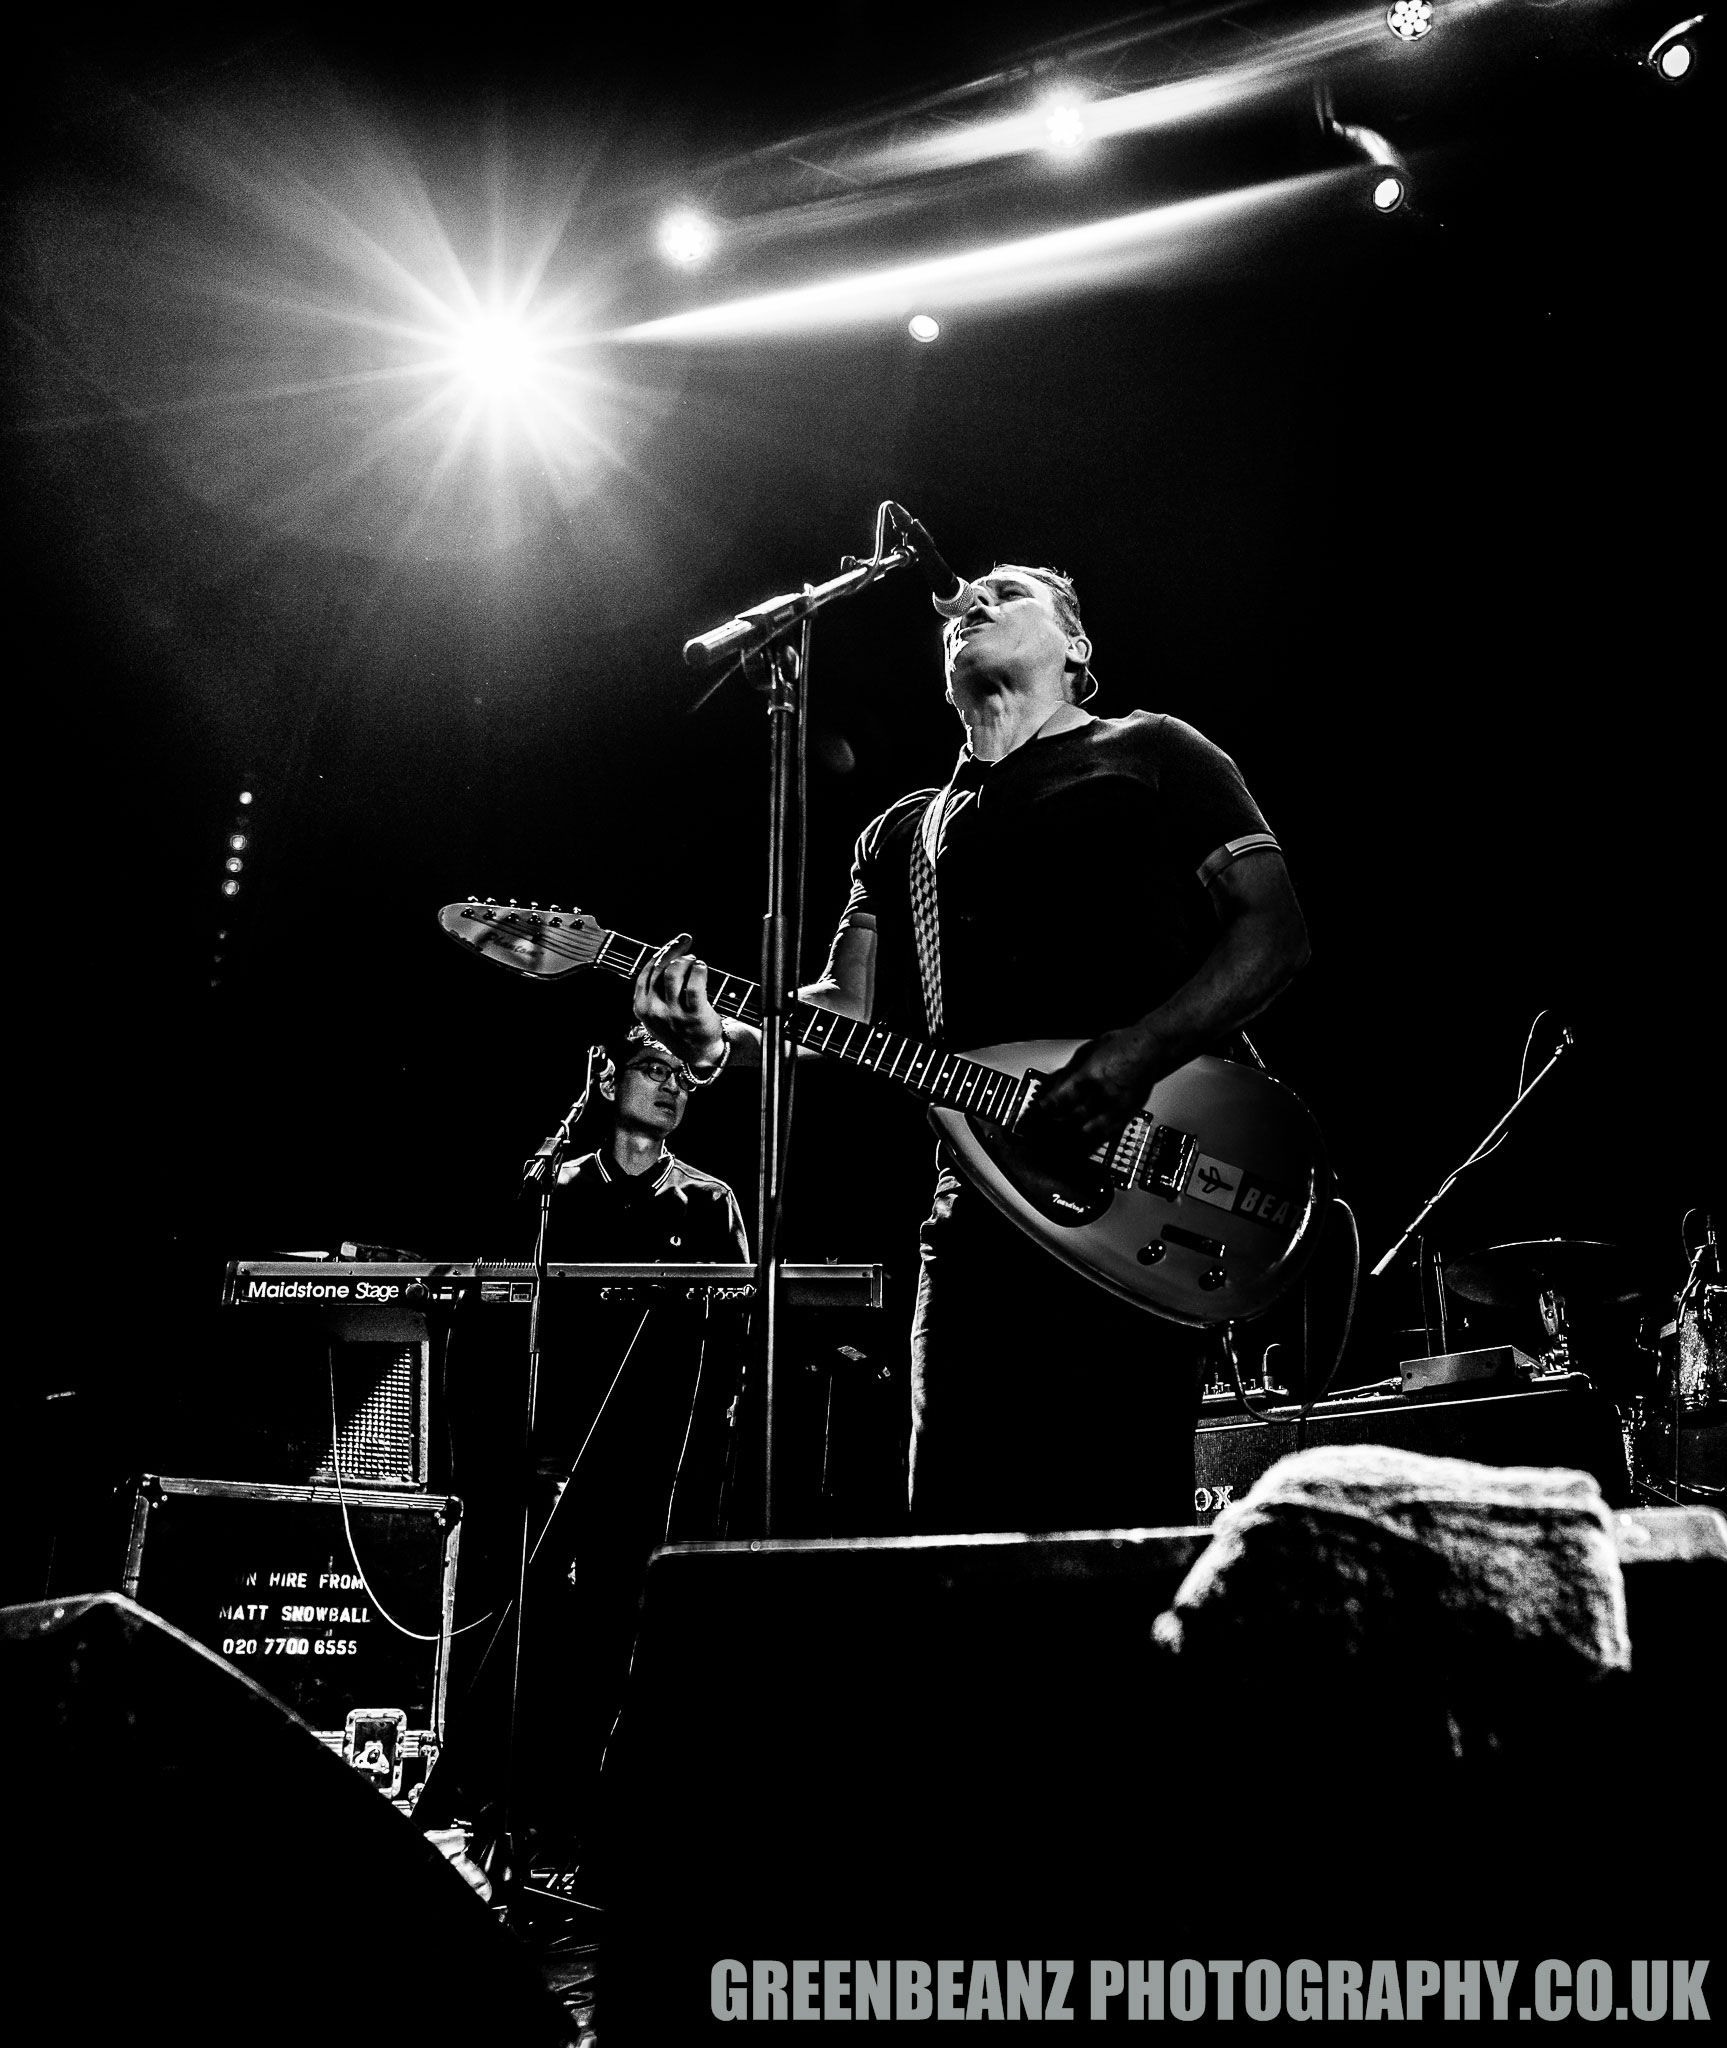 Dave Wakeling of The English Beat on stage in the UK 2018